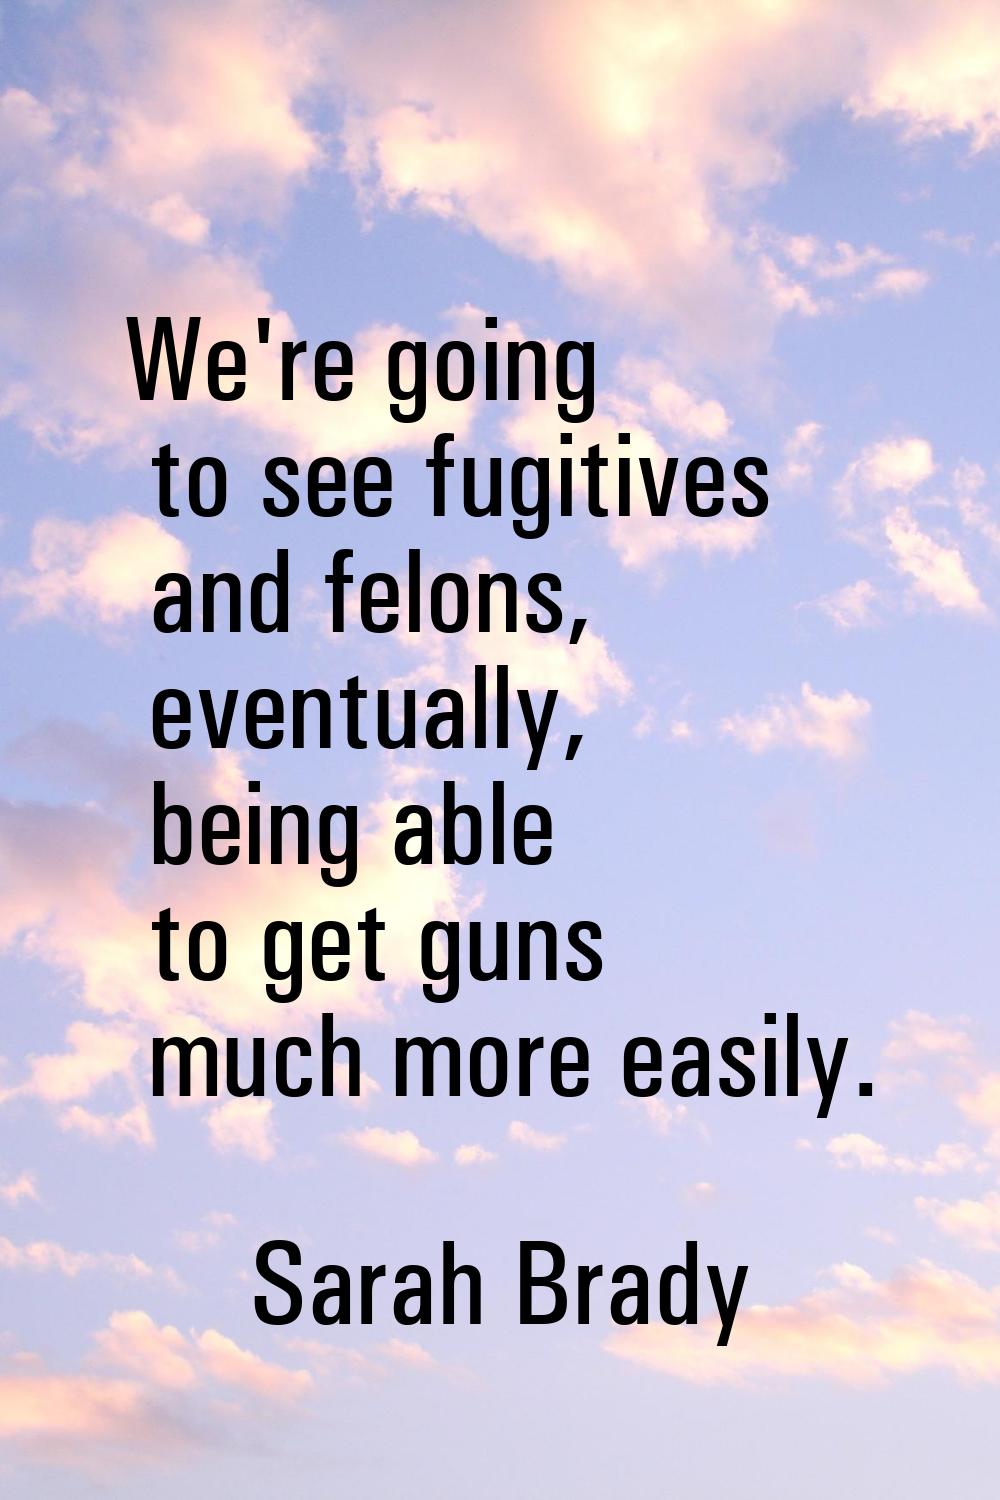 We're going to see fugitives and felons, eventually, being able to get guns much more easily.